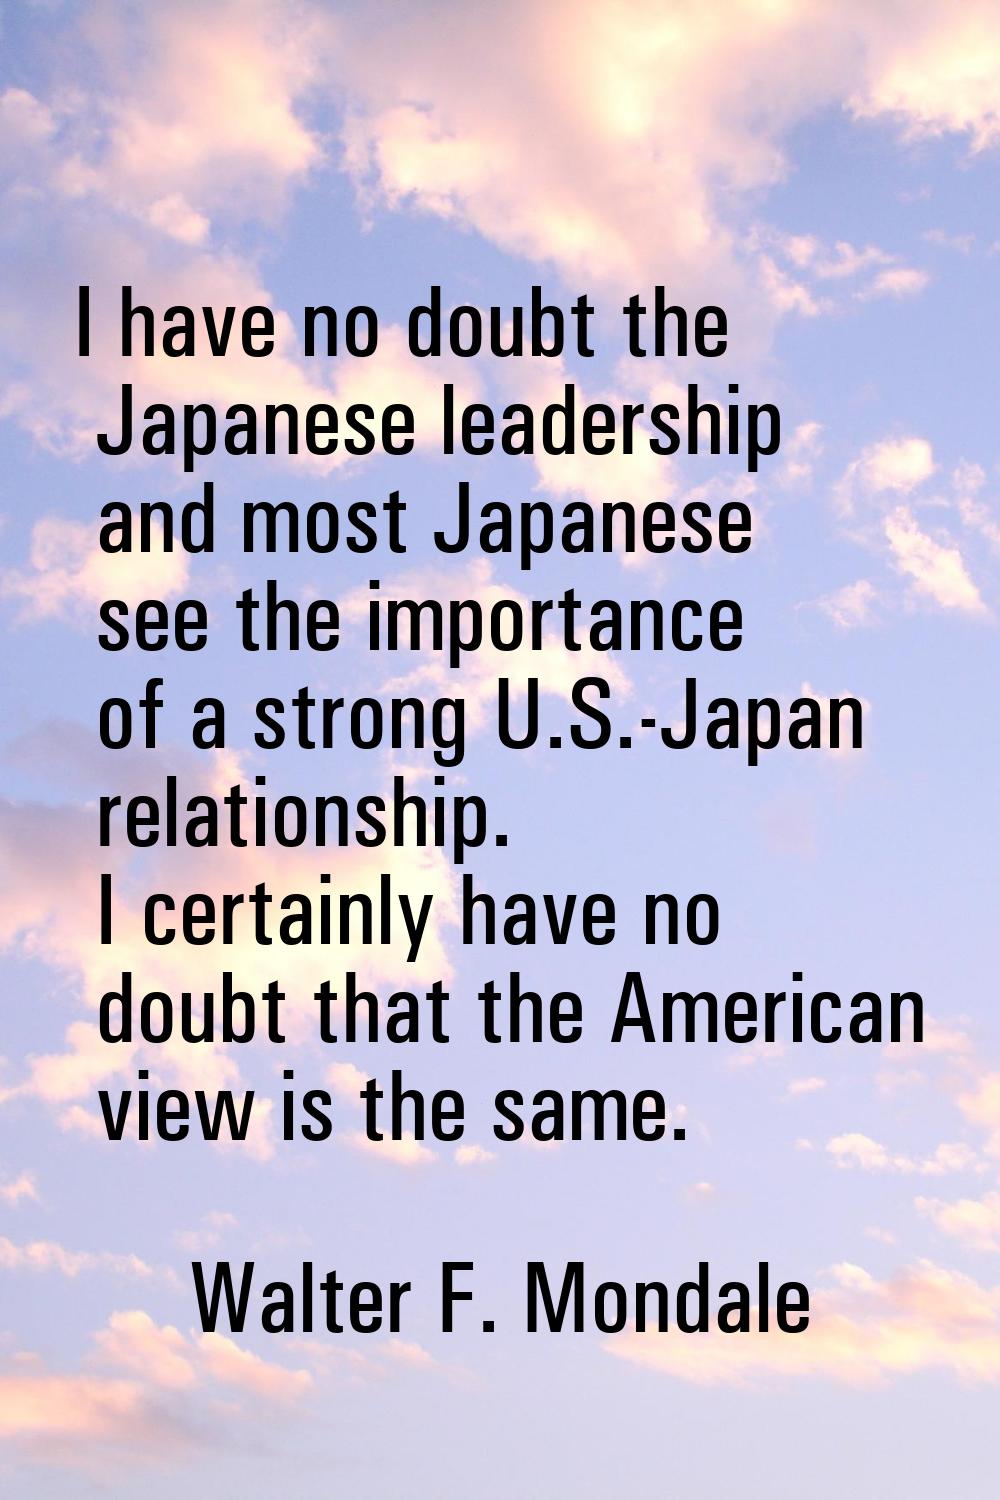 I have no doubt the Japanese leadership and most Japanese see the importance of a strong U.S.-Japan